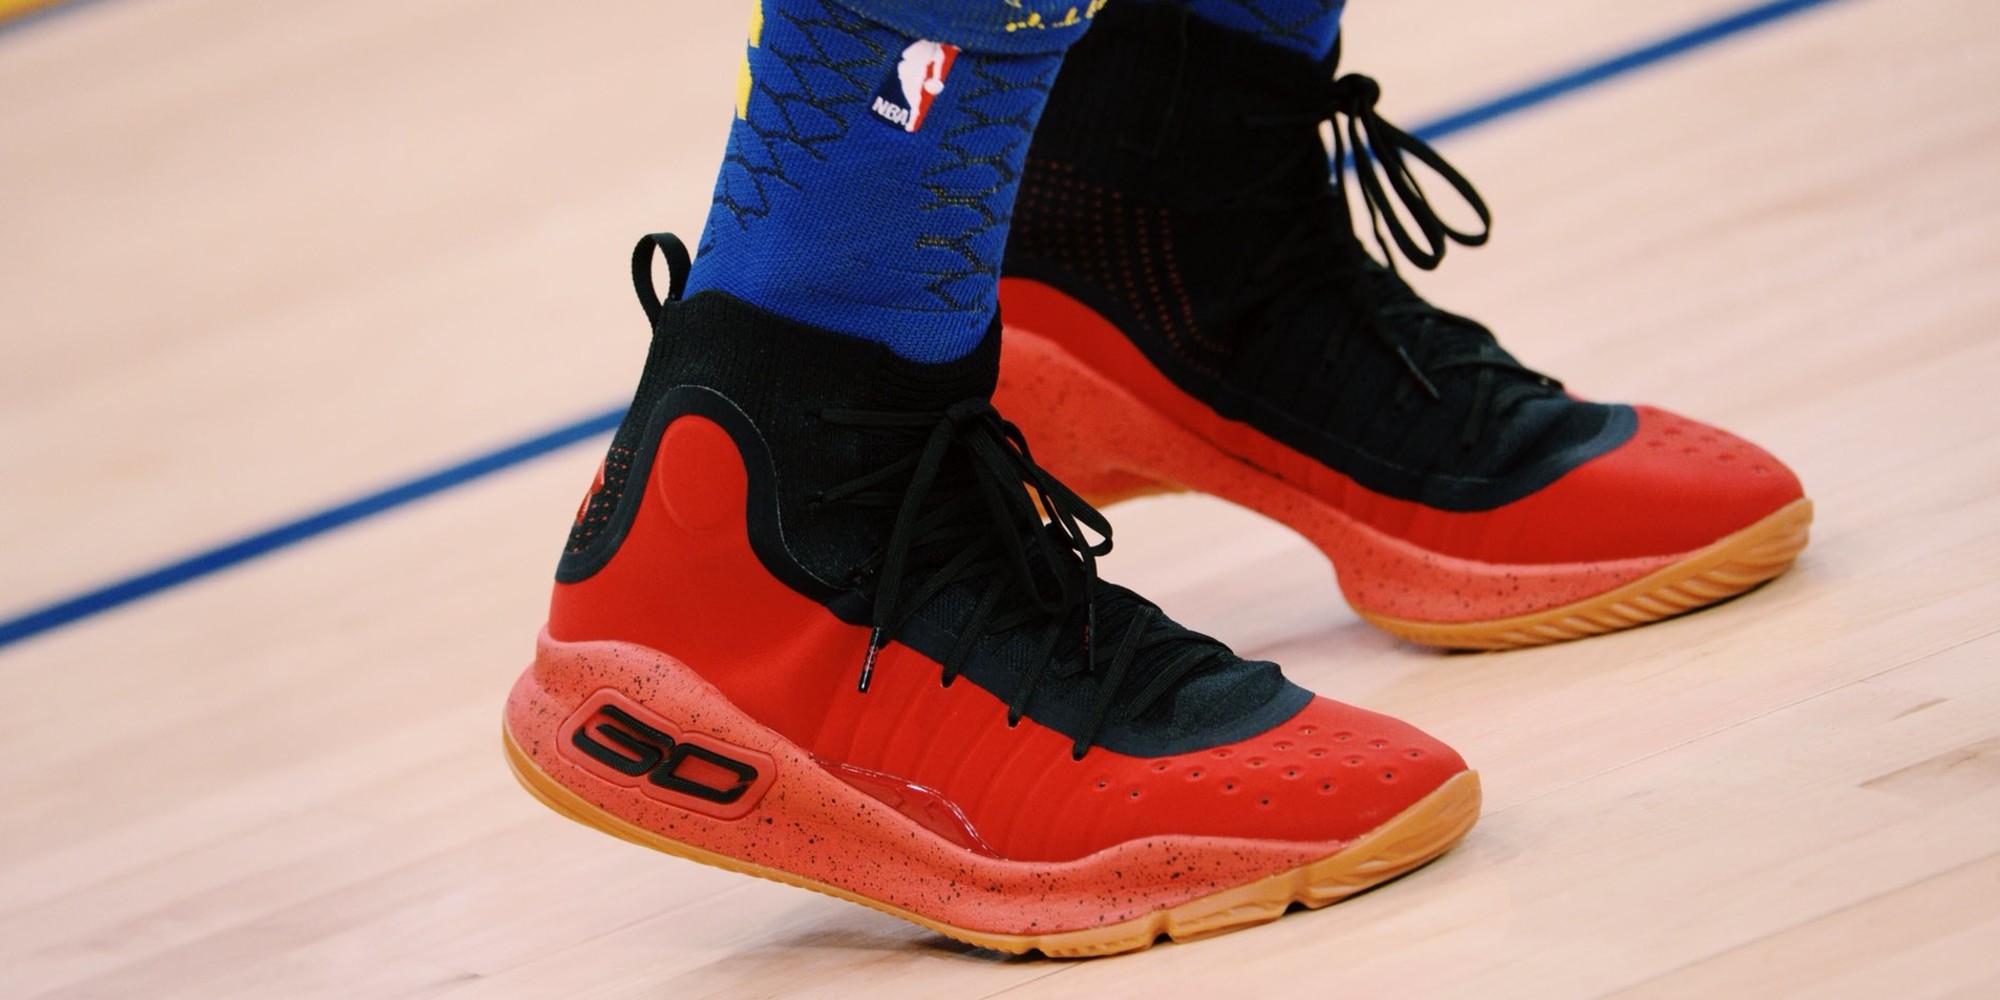 under-armour-curry-4-red-black (1 